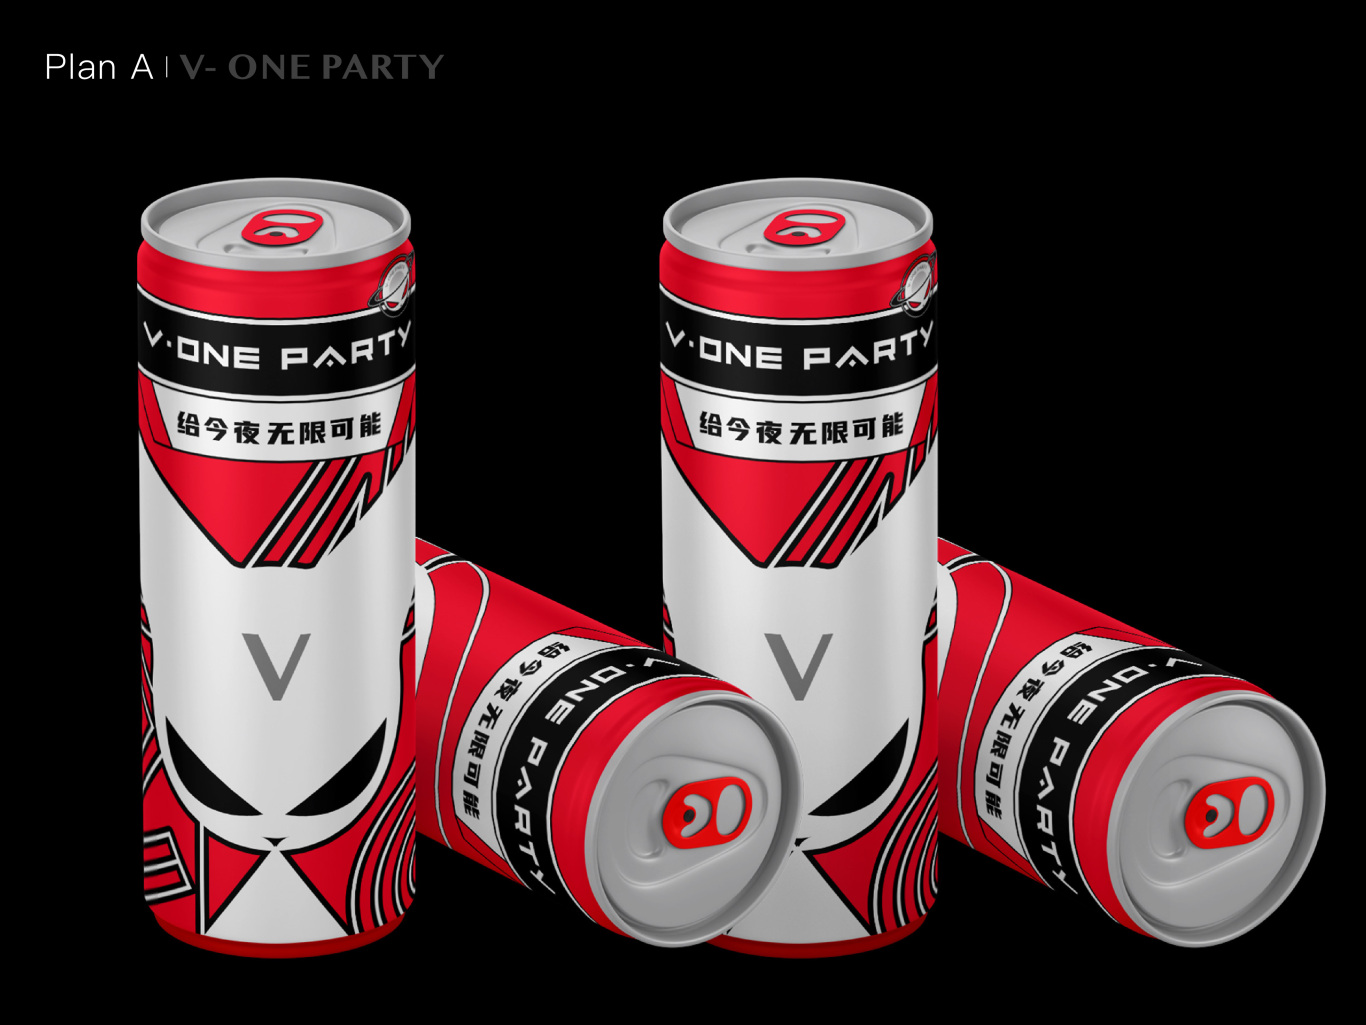 V-ONE PARTY夜店品牌图4